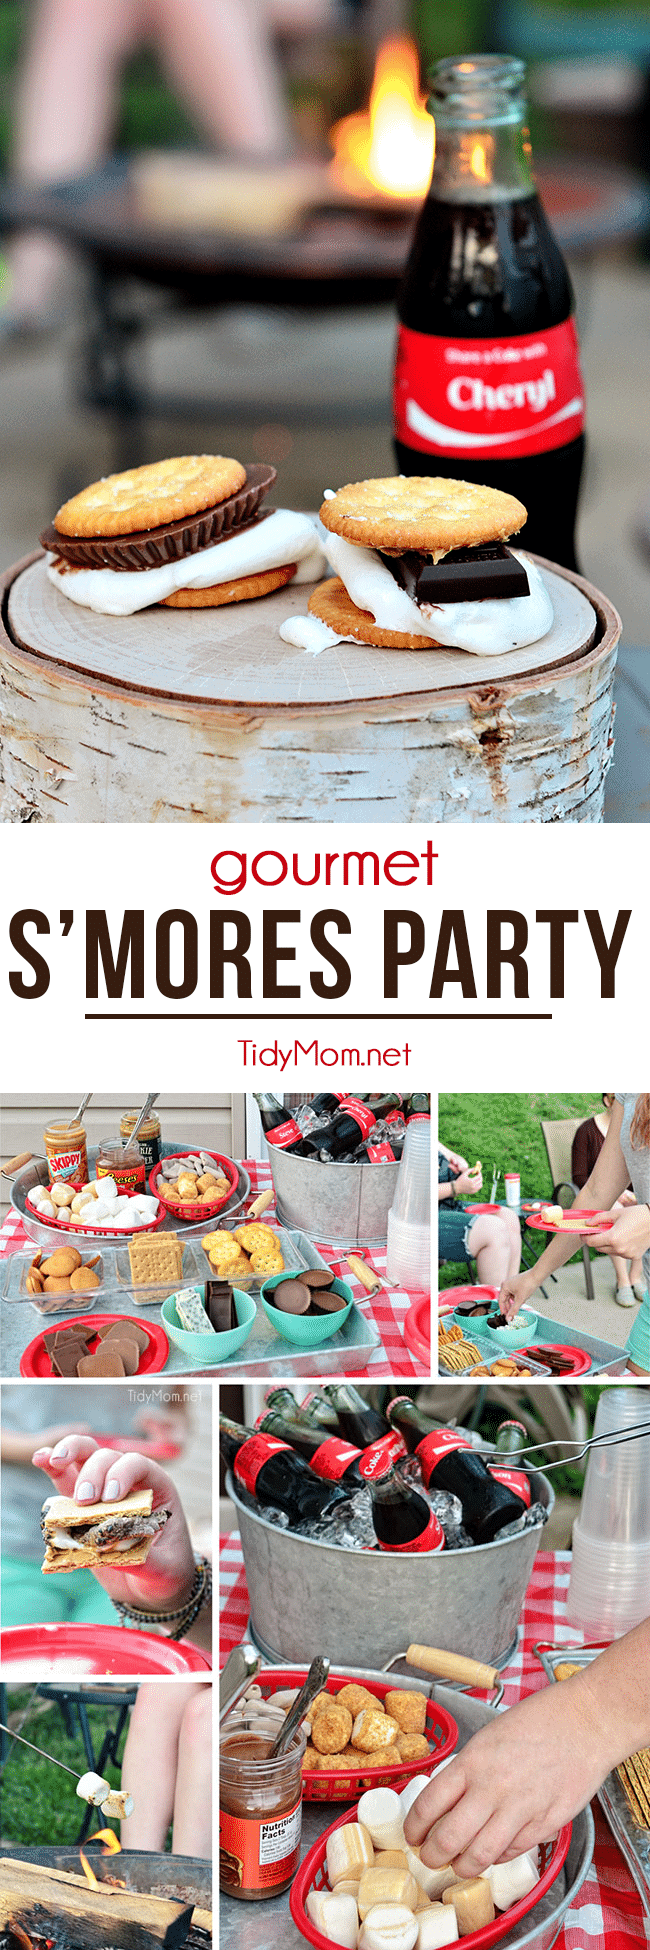 Everyone loves roasting marshmallows over a bonfire, but this time the nostalgic activity get's a fancy twist with a gourmet make-your-own s'mores party! at TidyMom.net